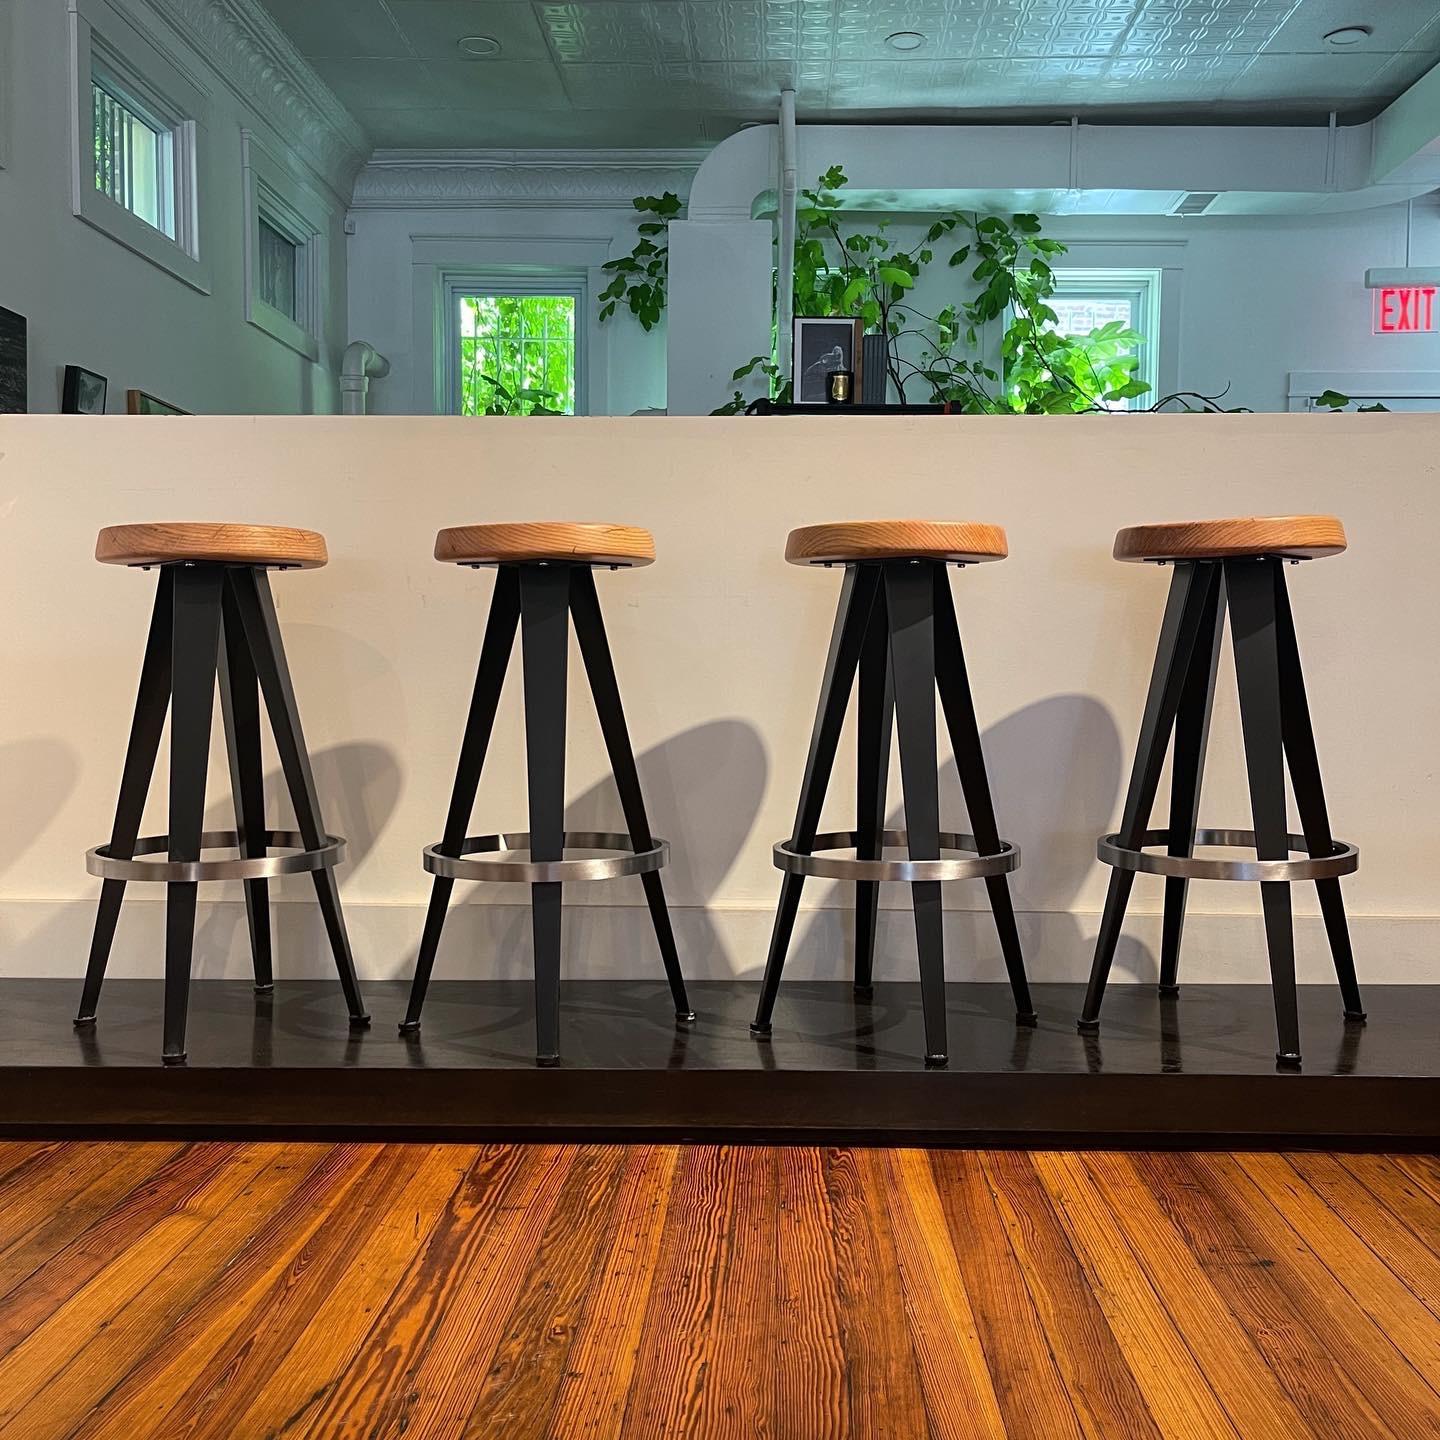 Bar stool after Jean Prouvé, ca. 1990 ( 4x available)

Black lacquered steel legs, polished steel circular footrests and solid oak seats with slightly concave centers

Price per stool : $3,150.00
Set of 4x  : $12,600.00